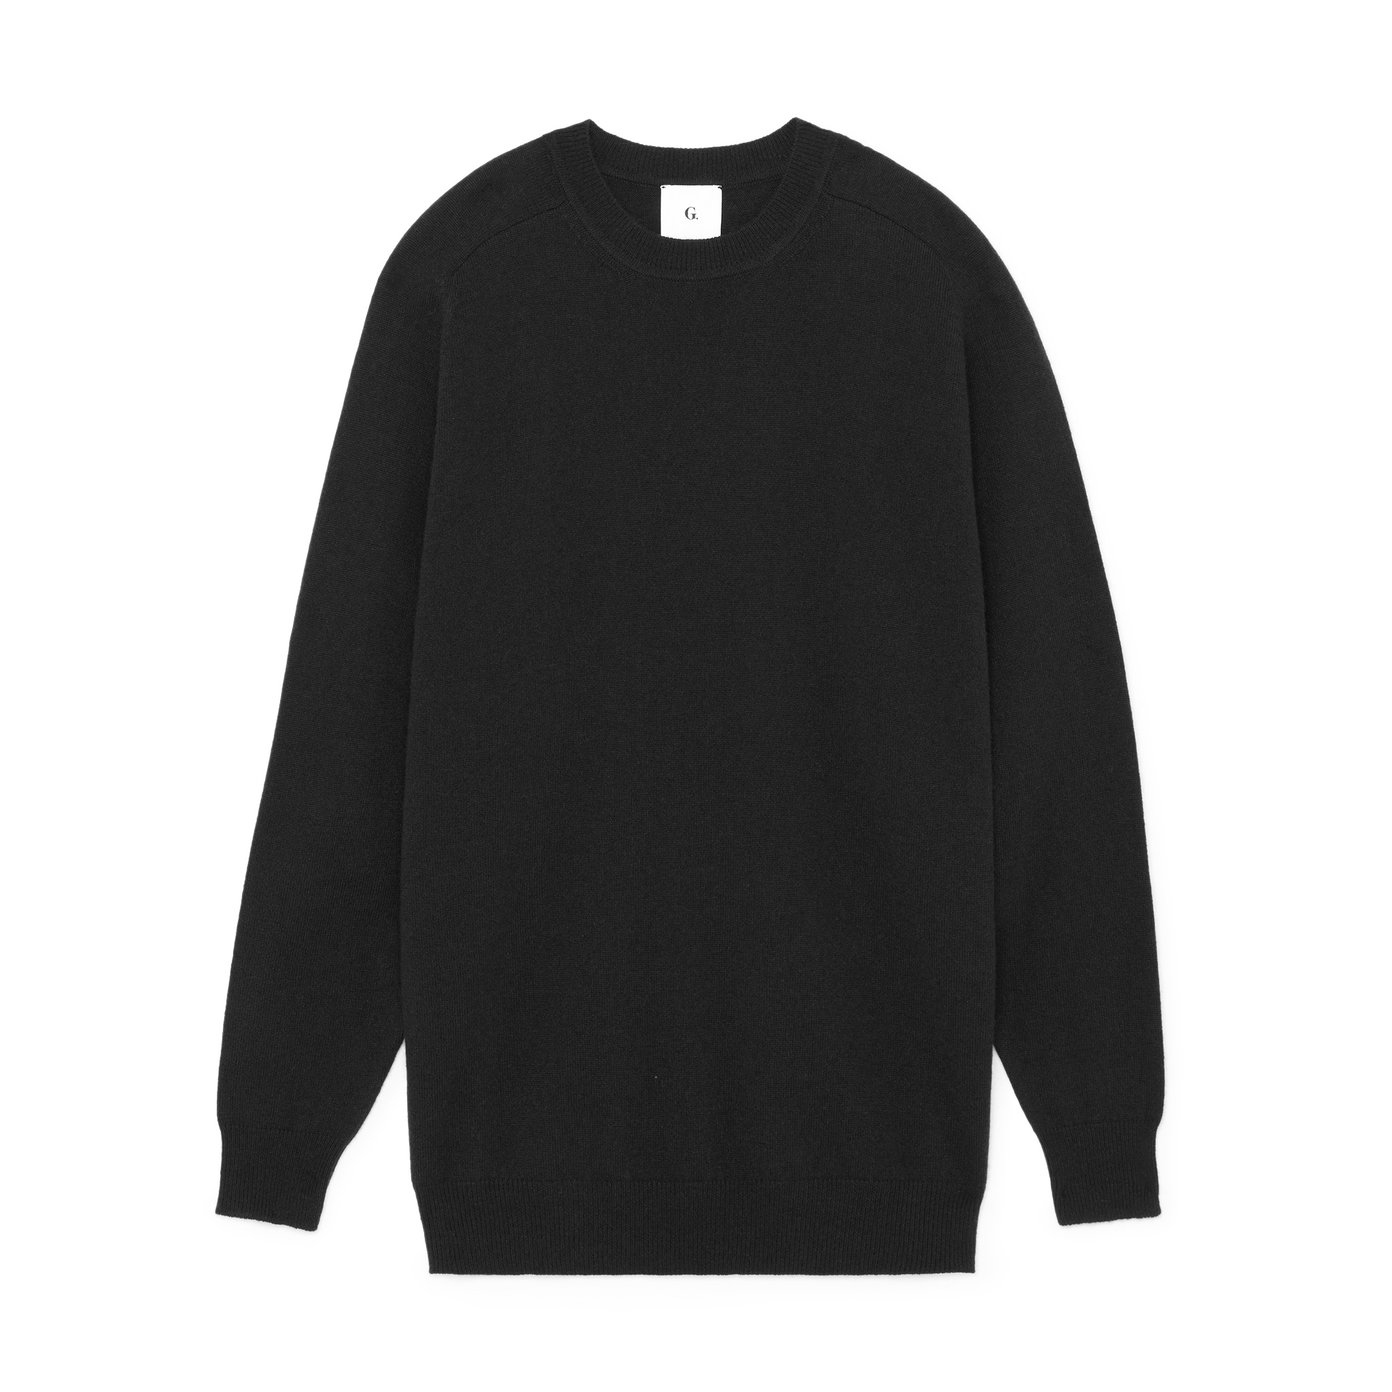 G. Label by goop Gia Classic Cashmere Crewneck | goop